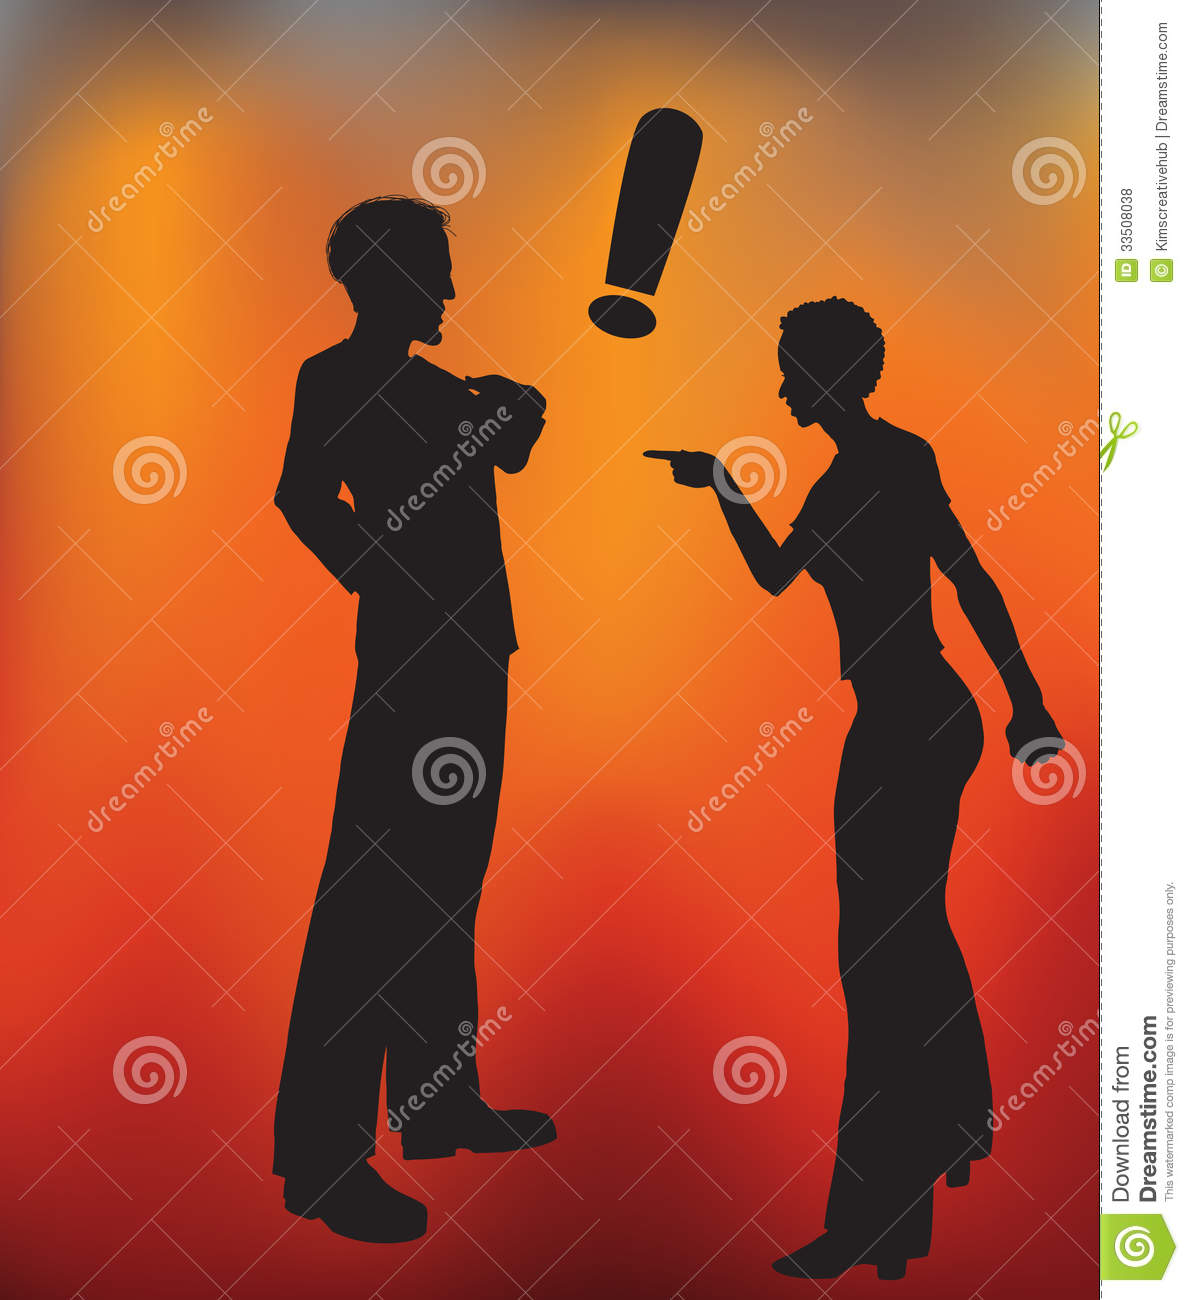 Vector Illustration Of A Man And Woman Heated Argument With A Gradient